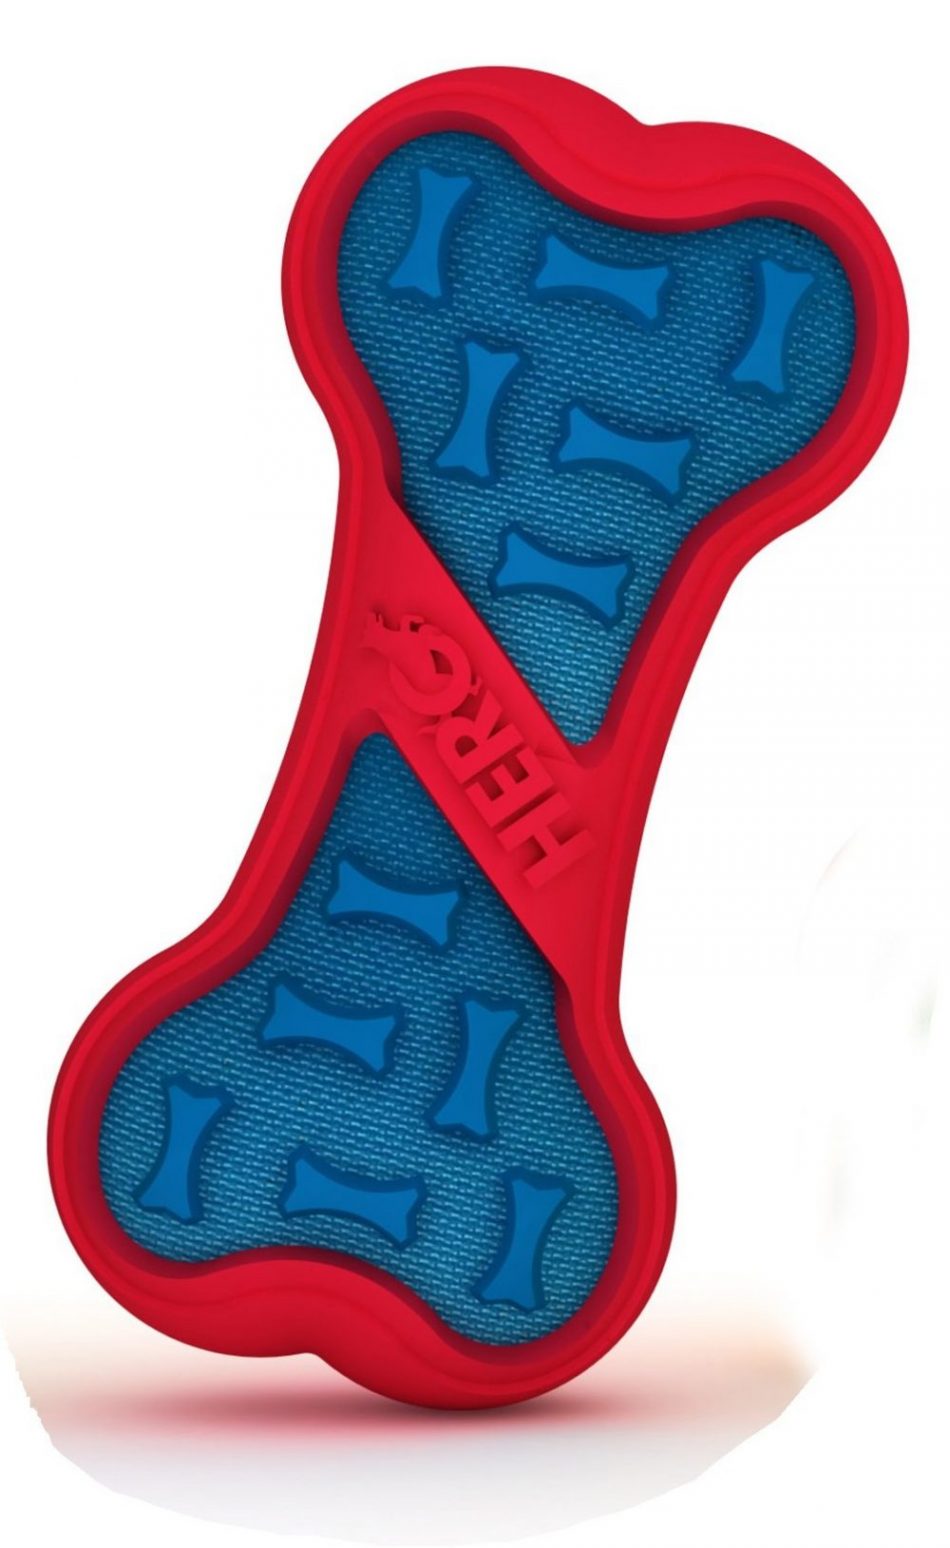 Outer Armor Dog Bone Toy